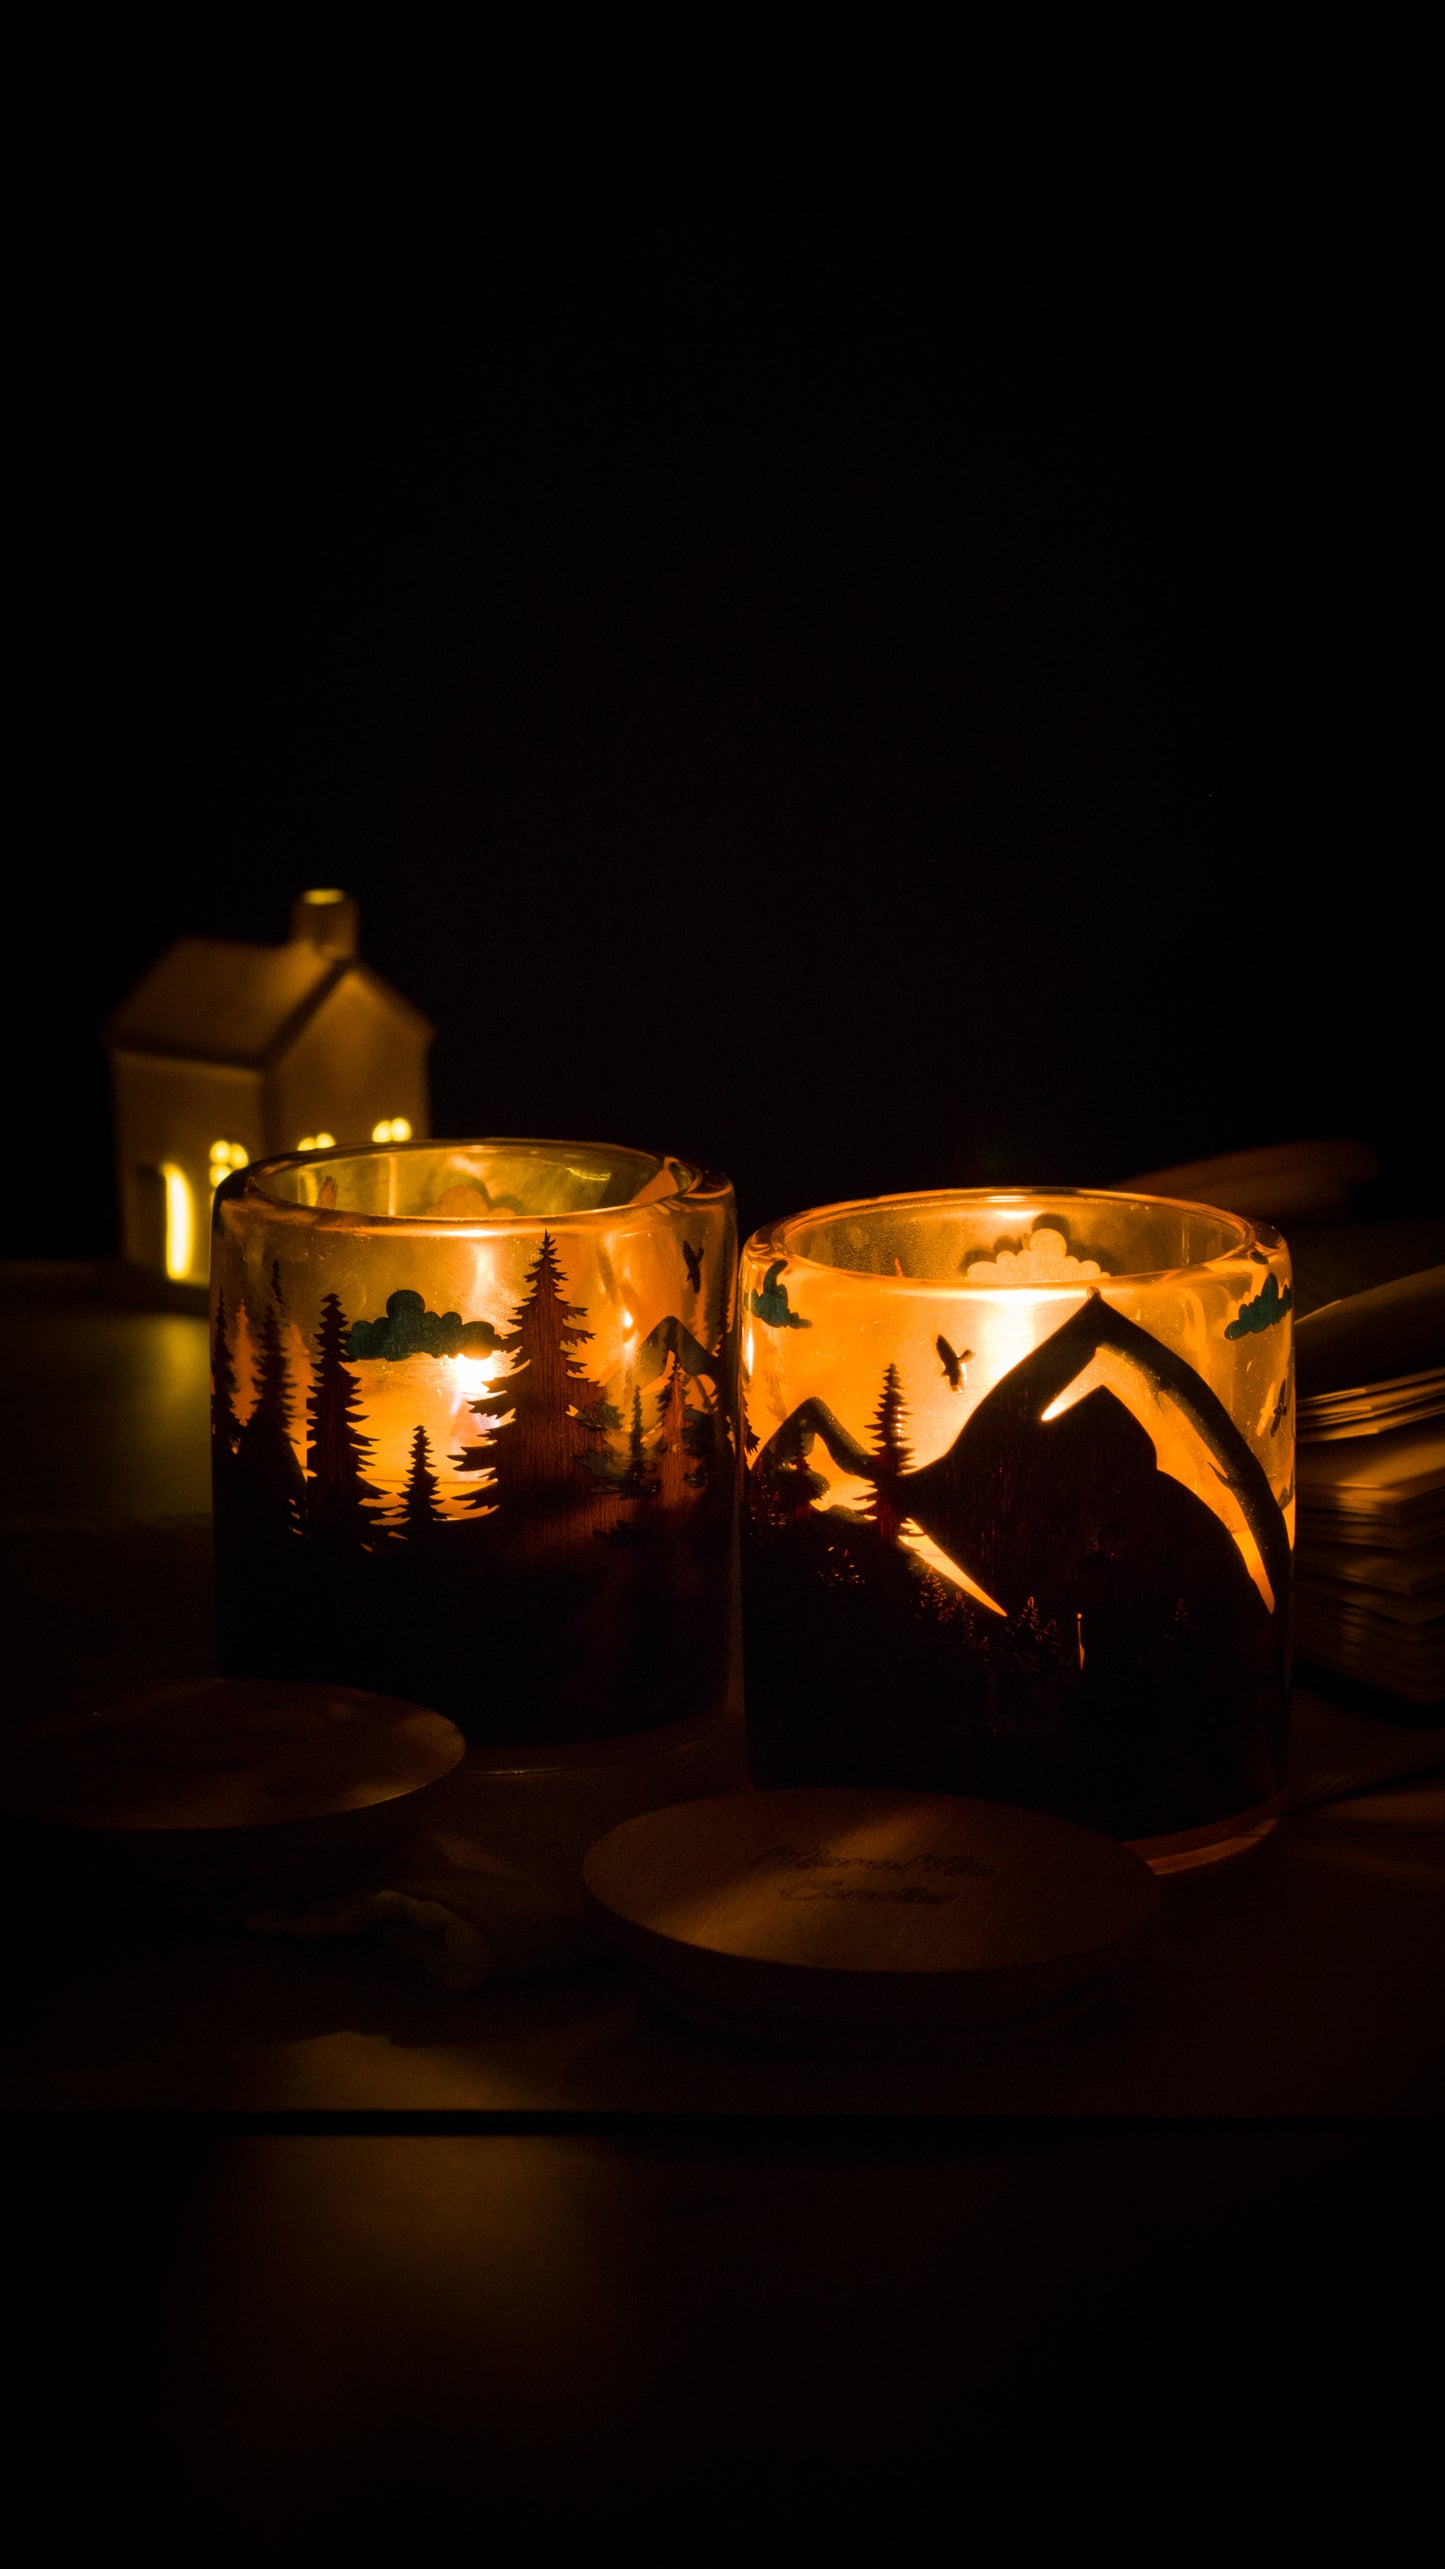 Candle in Handmade Candlestick "Hiking with Doggy"